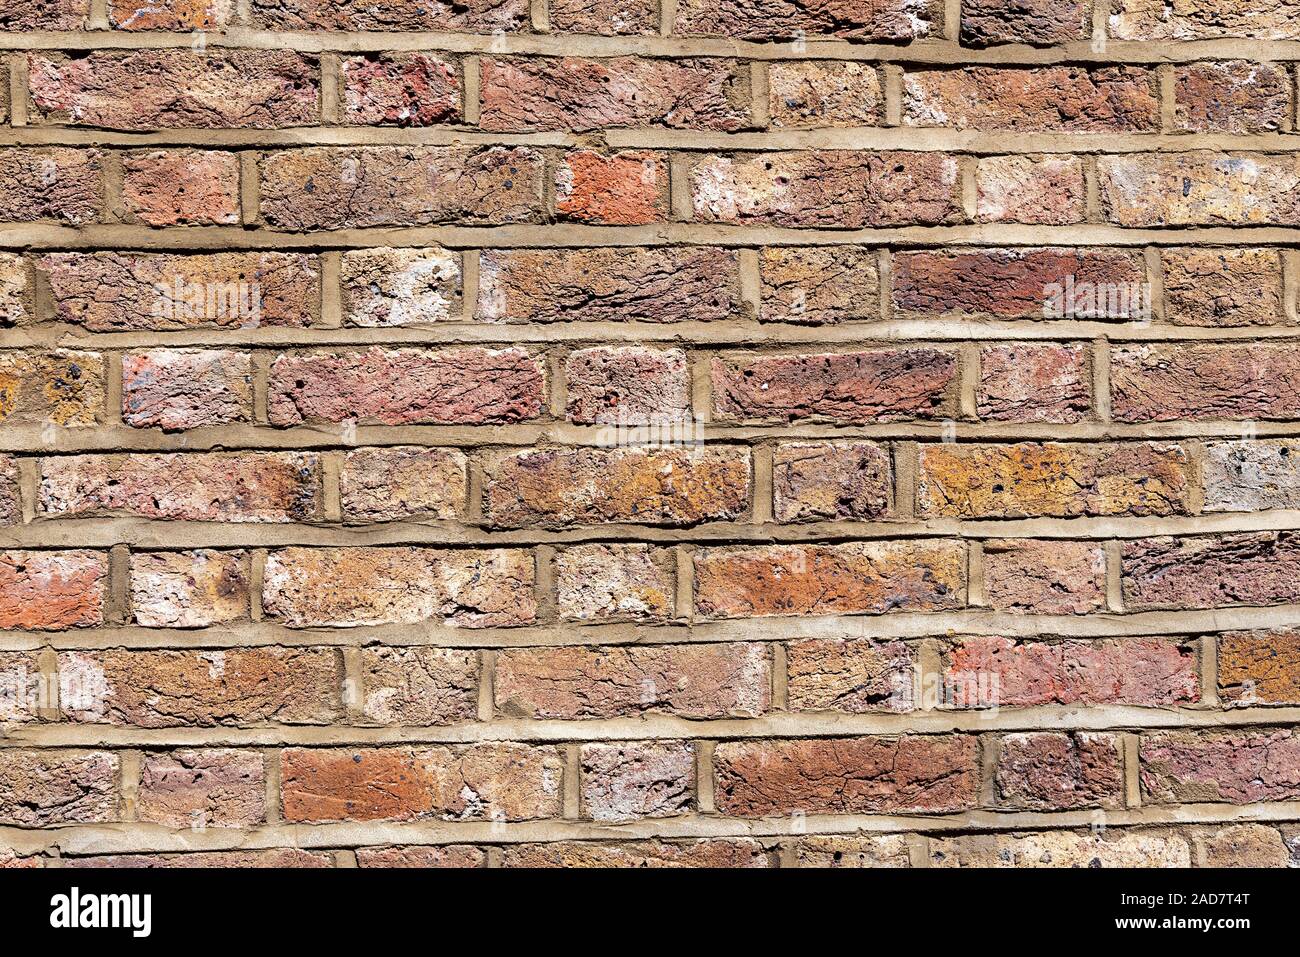 Background from a rough and worn red brick wall Stock Photo